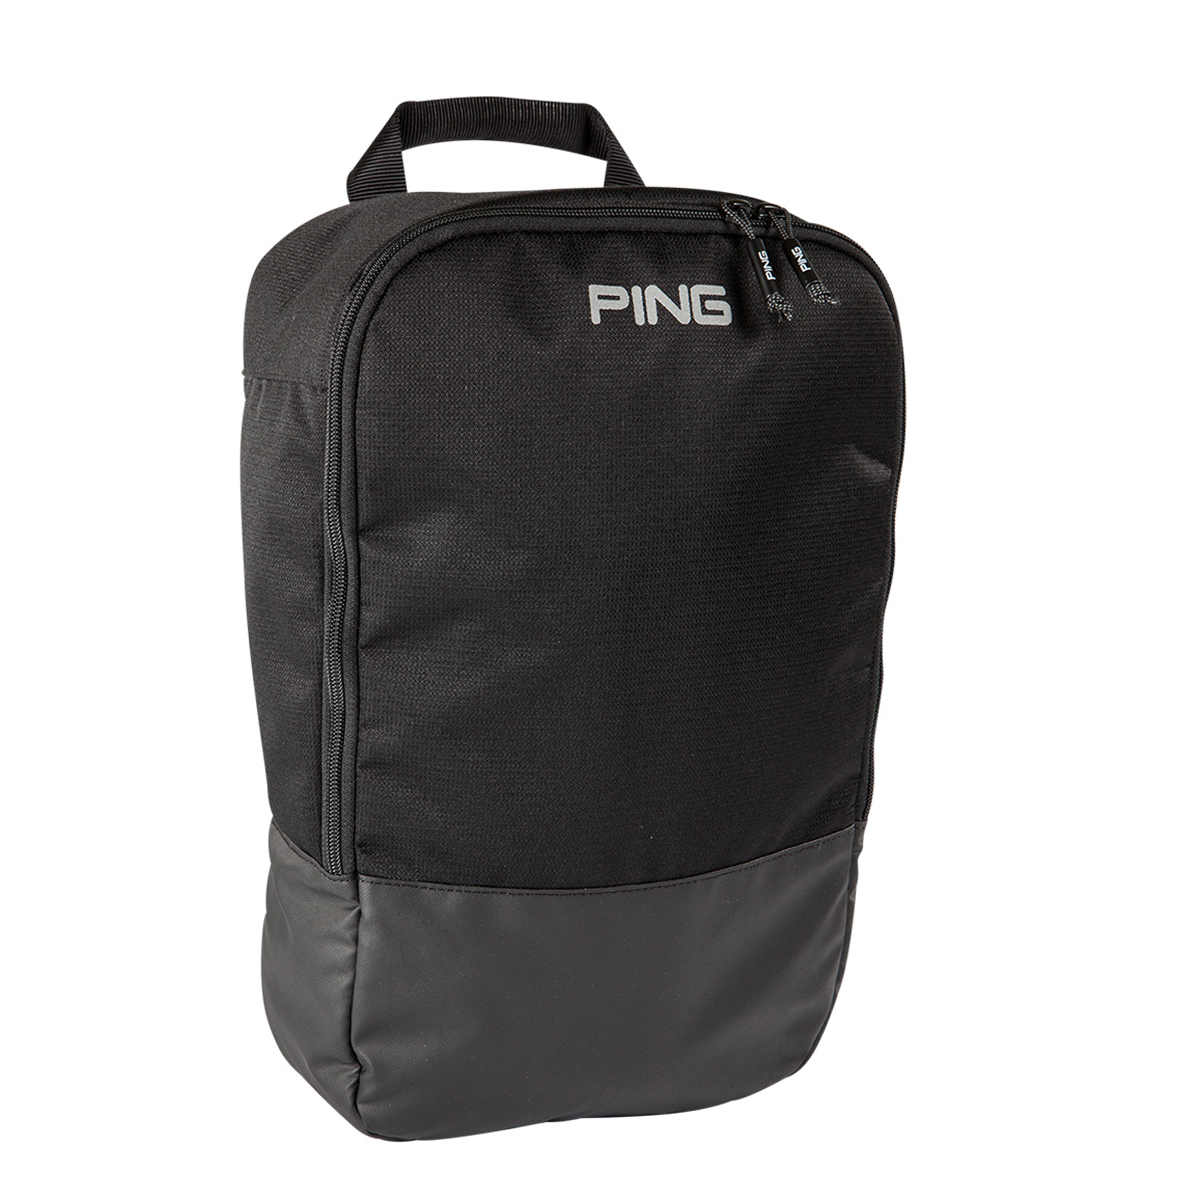 PING Shoe Bag 2018 from american golf